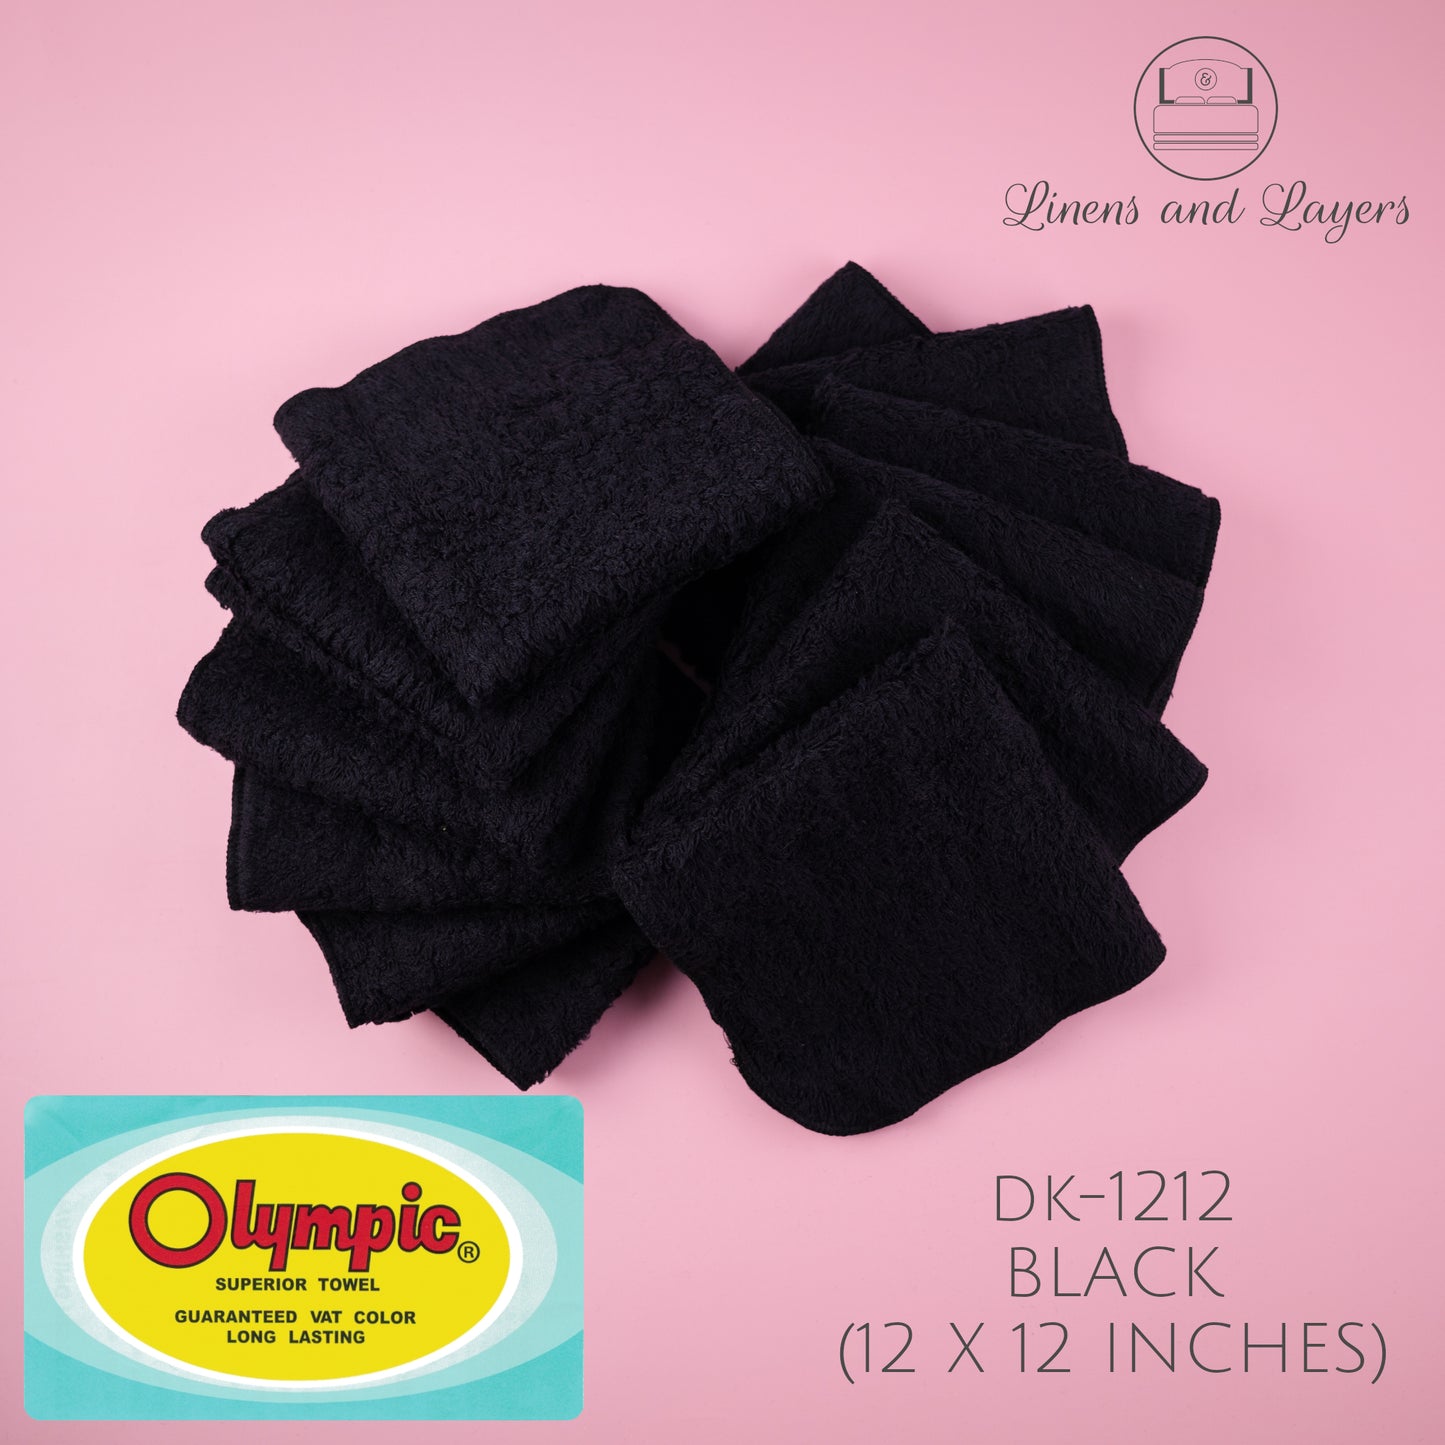 Olympic Black Face Towel / Salon Towel / Spa Towel  (430 GSM) -  DK-1212  Terrycloth - 12x12 inches